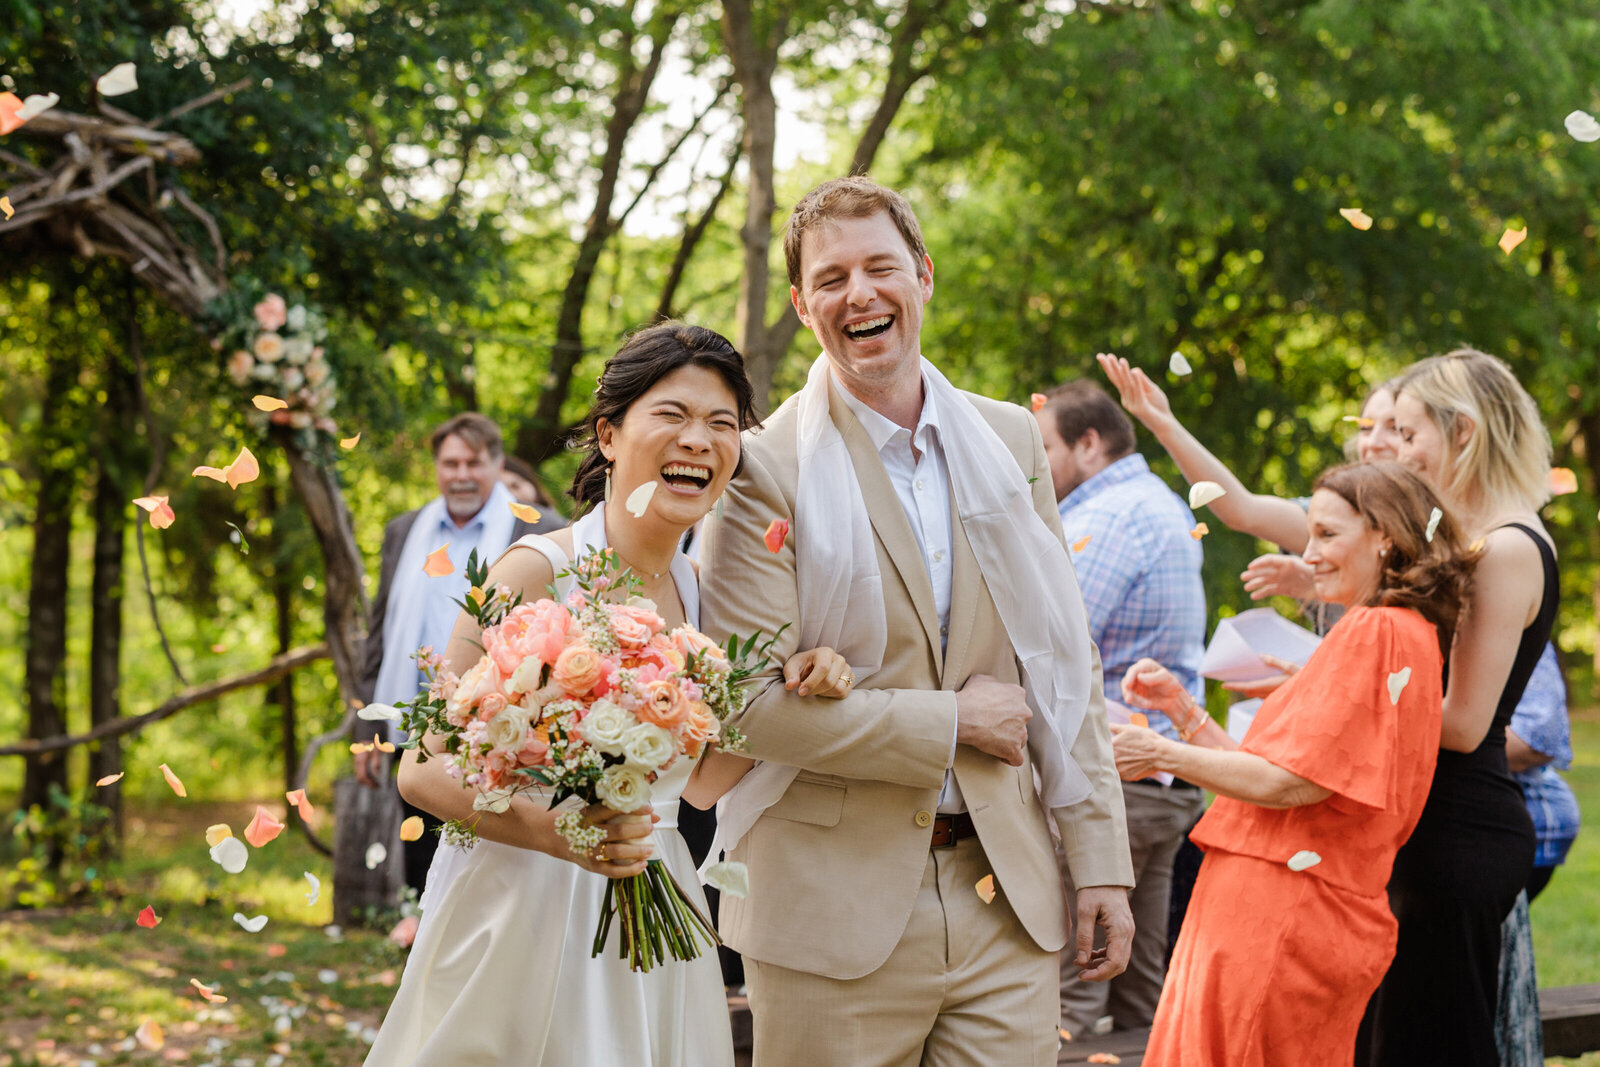 DFW Wedding Photographer; Asian bride and Caucasian groom  in formal wedding attire joyfully laughing arm in arm as they recess down the aisle after their wedding ceremony while their guests shower them with rose pedals